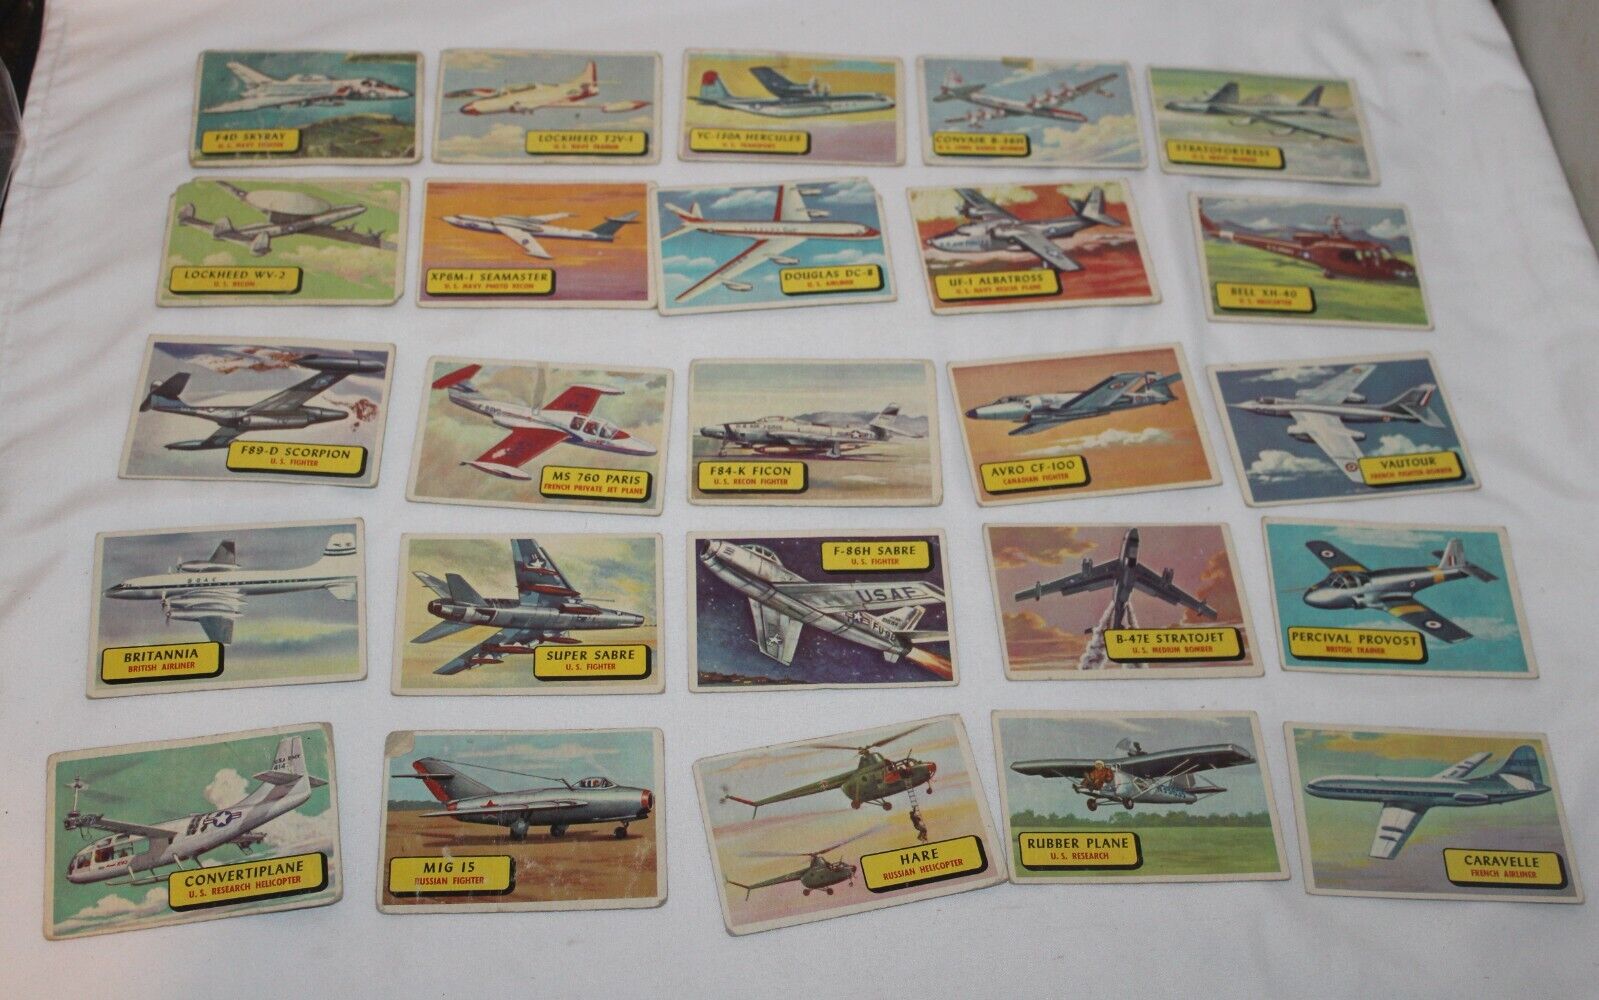 1957 TOPPS WINGS CARDS PARTIAL SET LOT of 43 Planes of the World Bombers